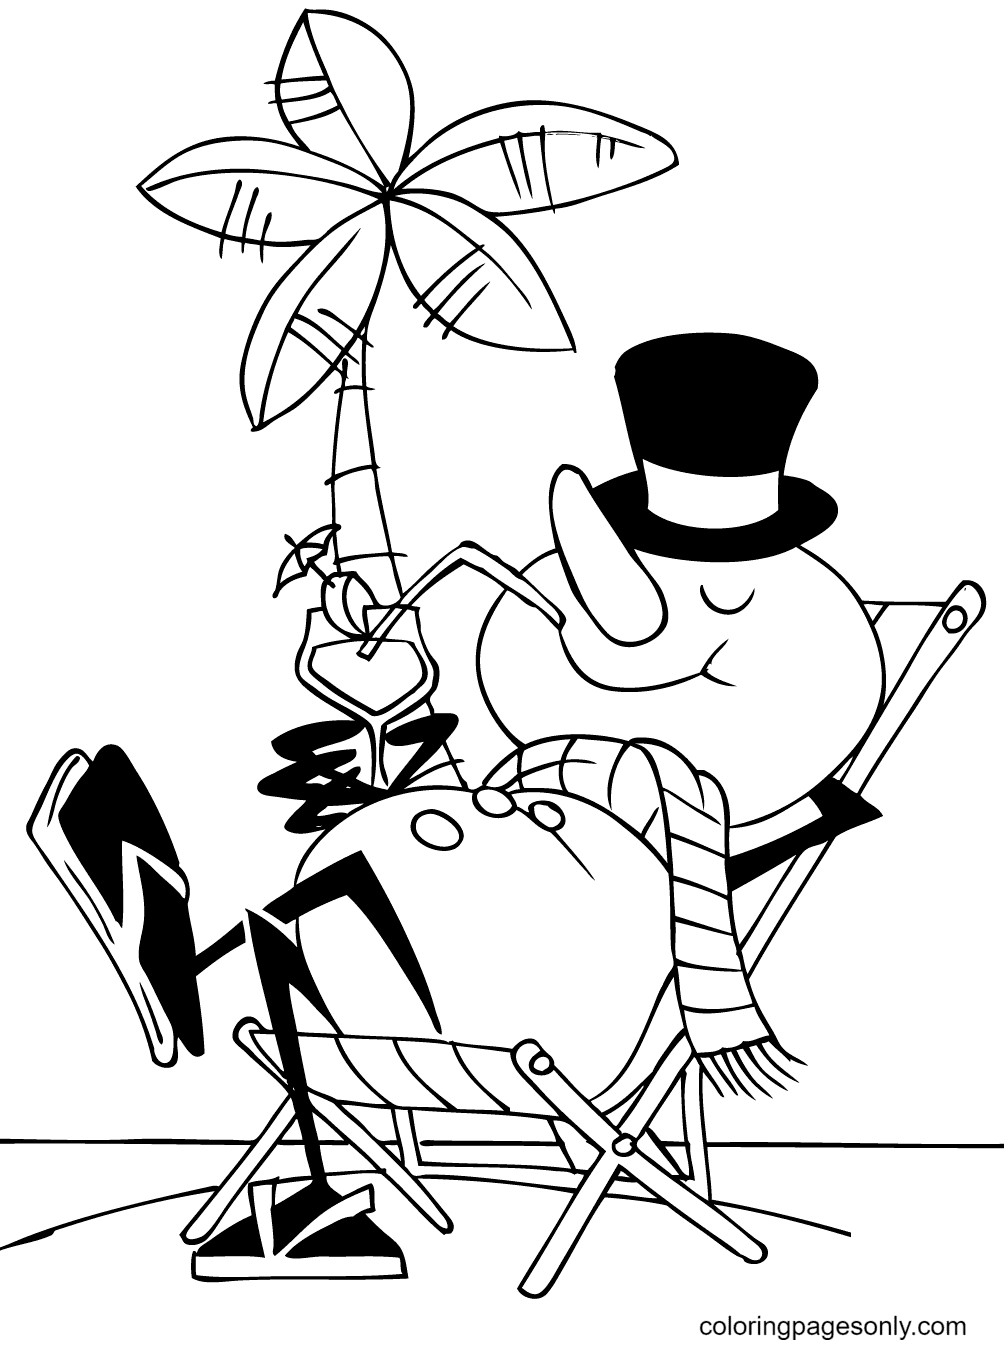 Cartoon Snowman on a Beach Coloring Pages